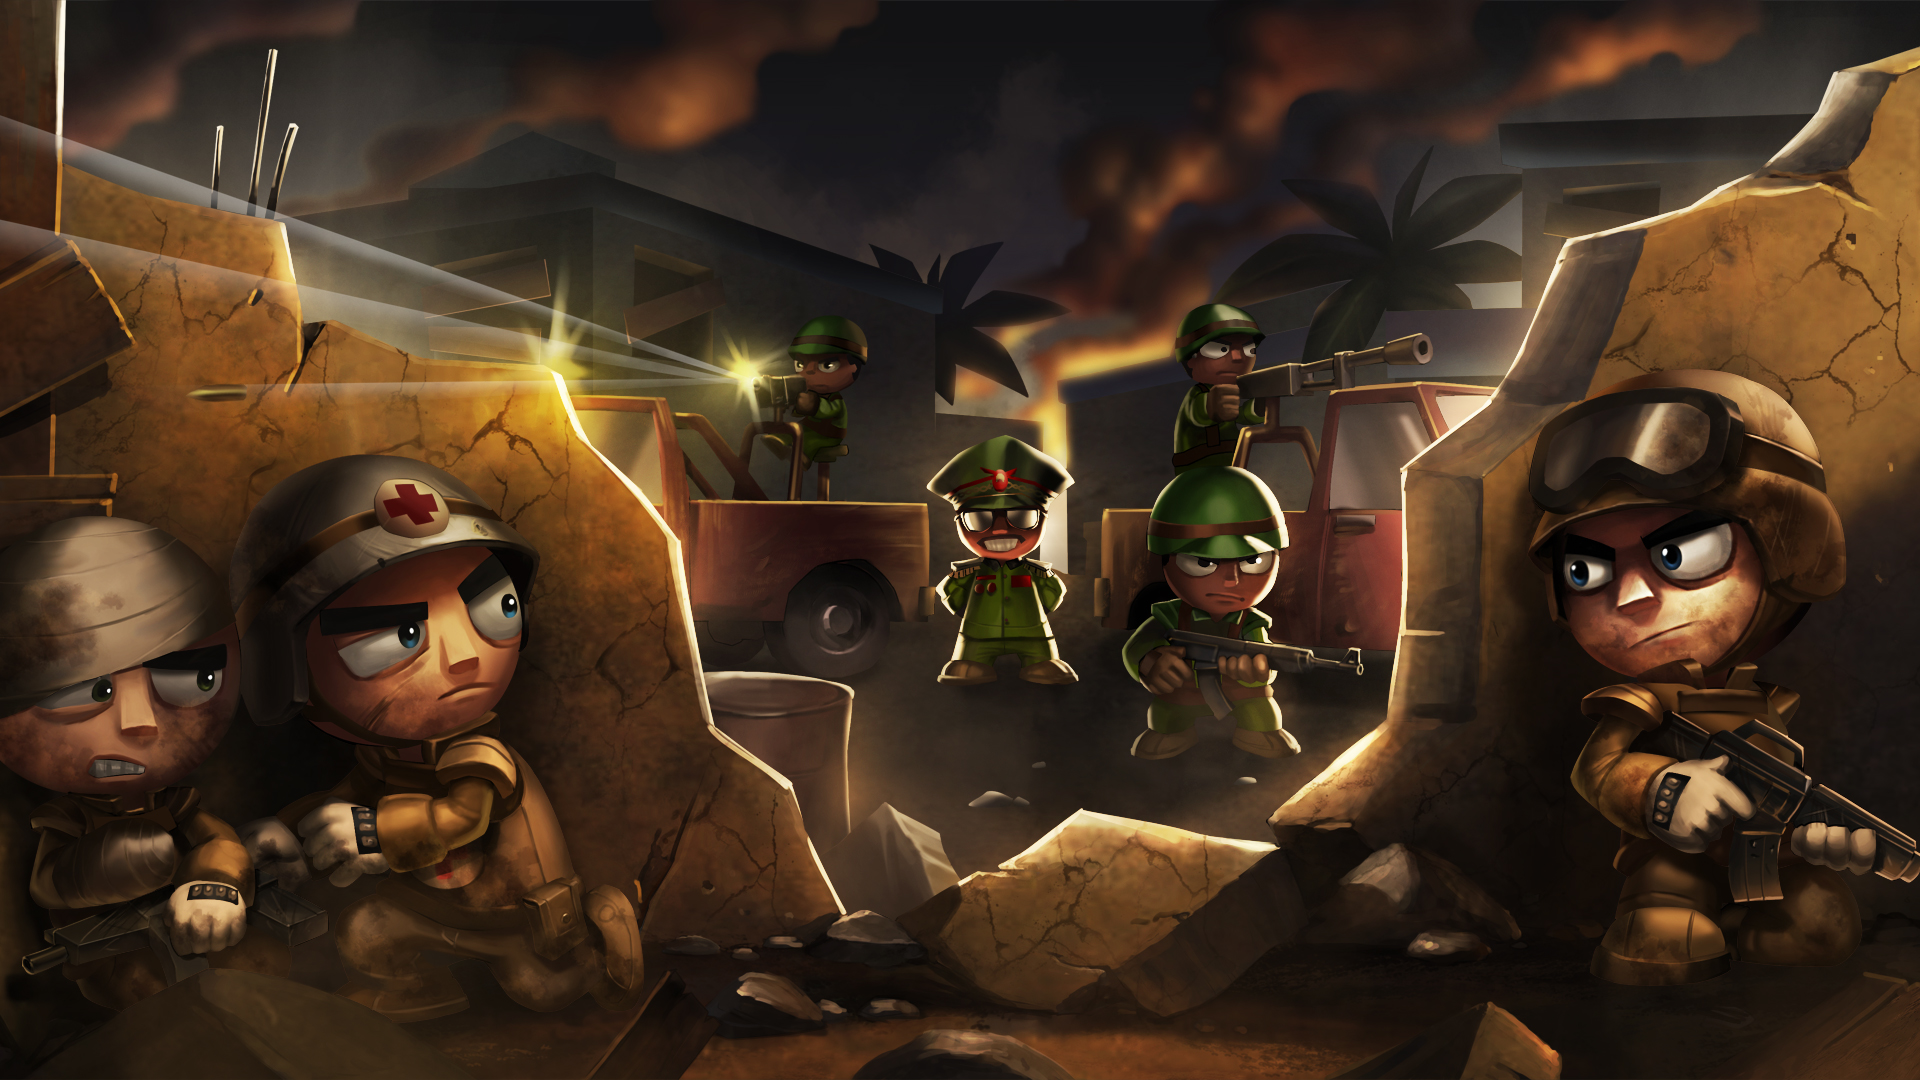 for iphone download Tiny Troopers Joint Ops XL